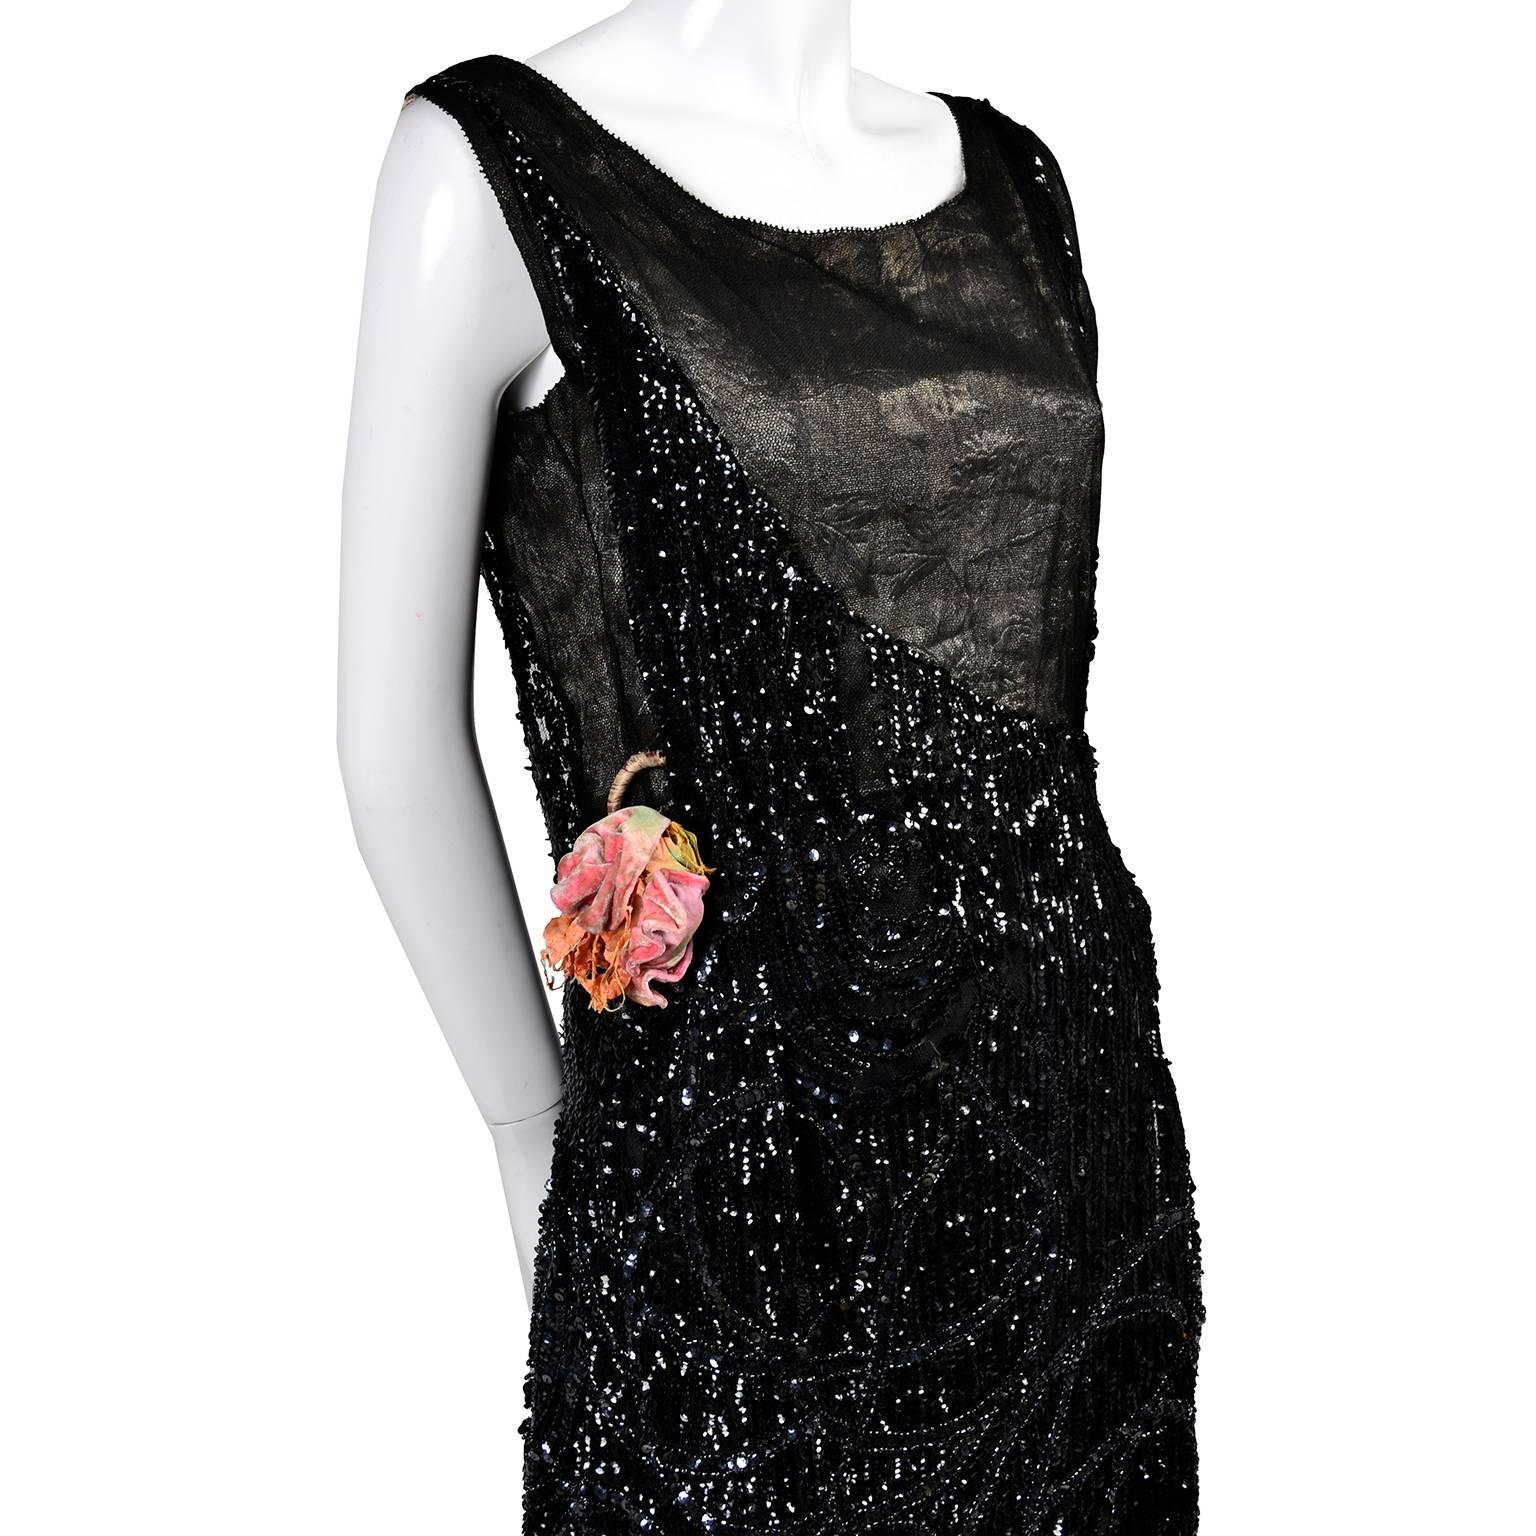 This beautiful 1920's vintage dress is covered in sparkling sequins and also has some rows of tiny beads.  This dress has an interesting bodice with a metallic black fabric on the diagonal on the front and the back, and its original silk velvet pink